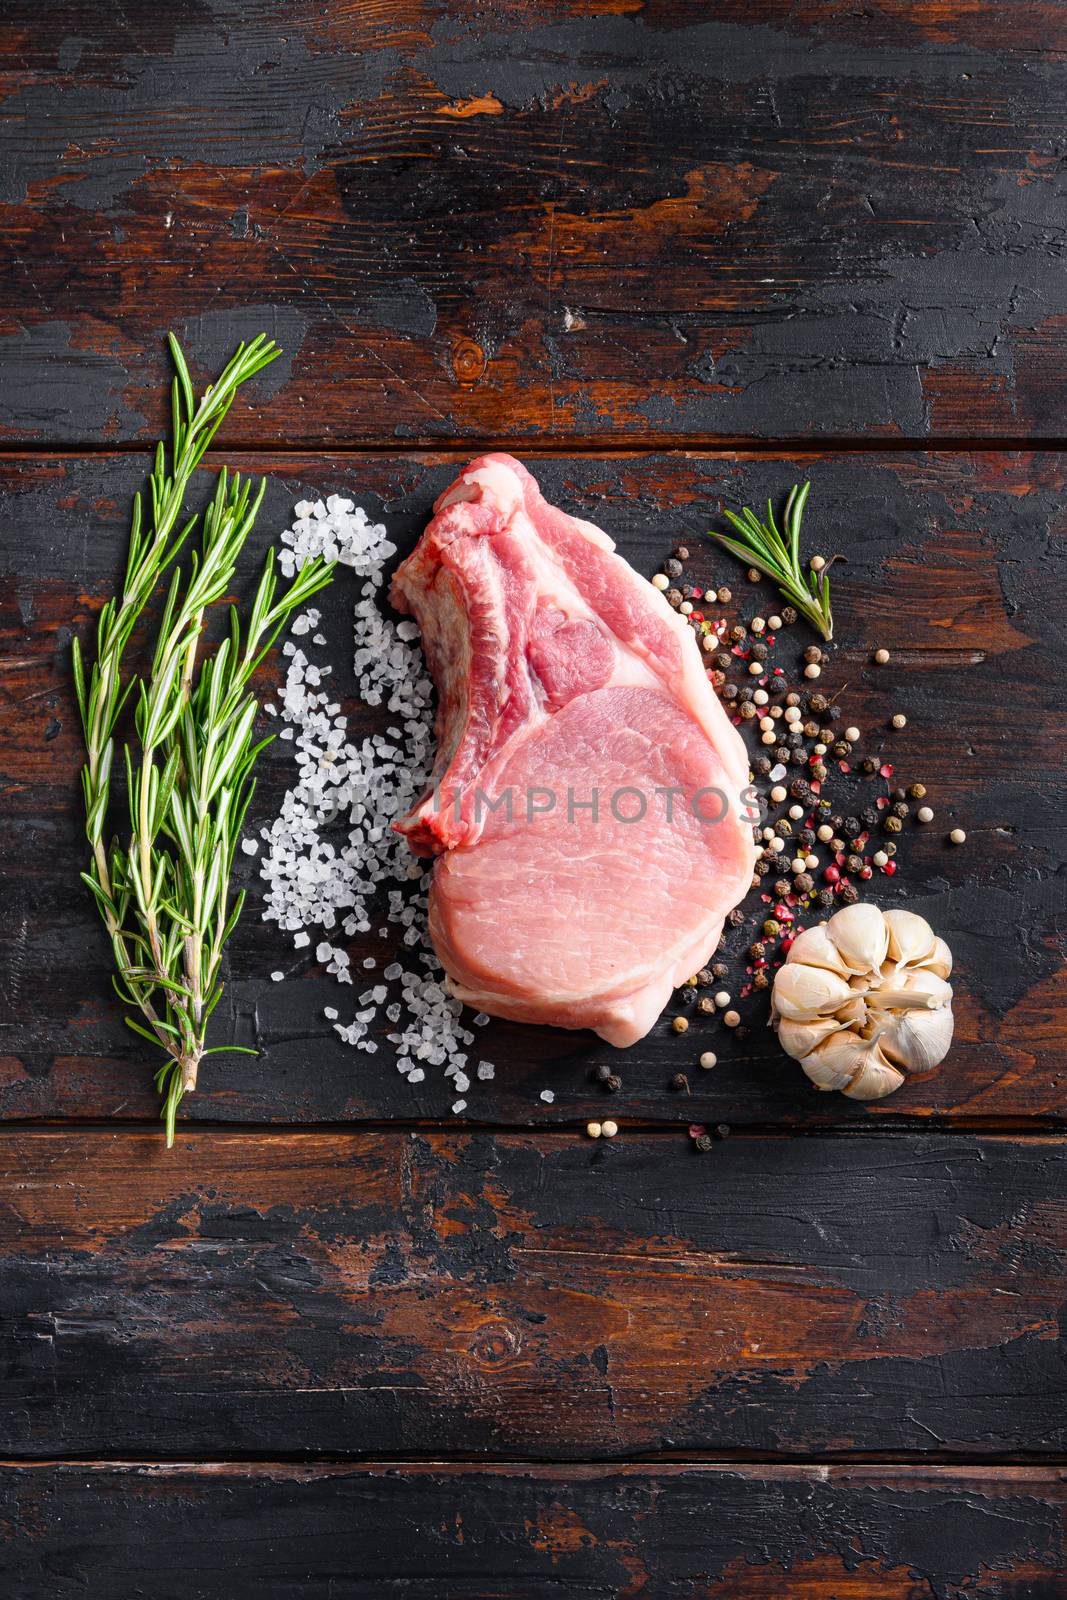 Raw meat on dark wood rustic background. Bio organic farm pork steak with herbs and spices. Cooking meat. Copy space. Top view vertical space for price or text.